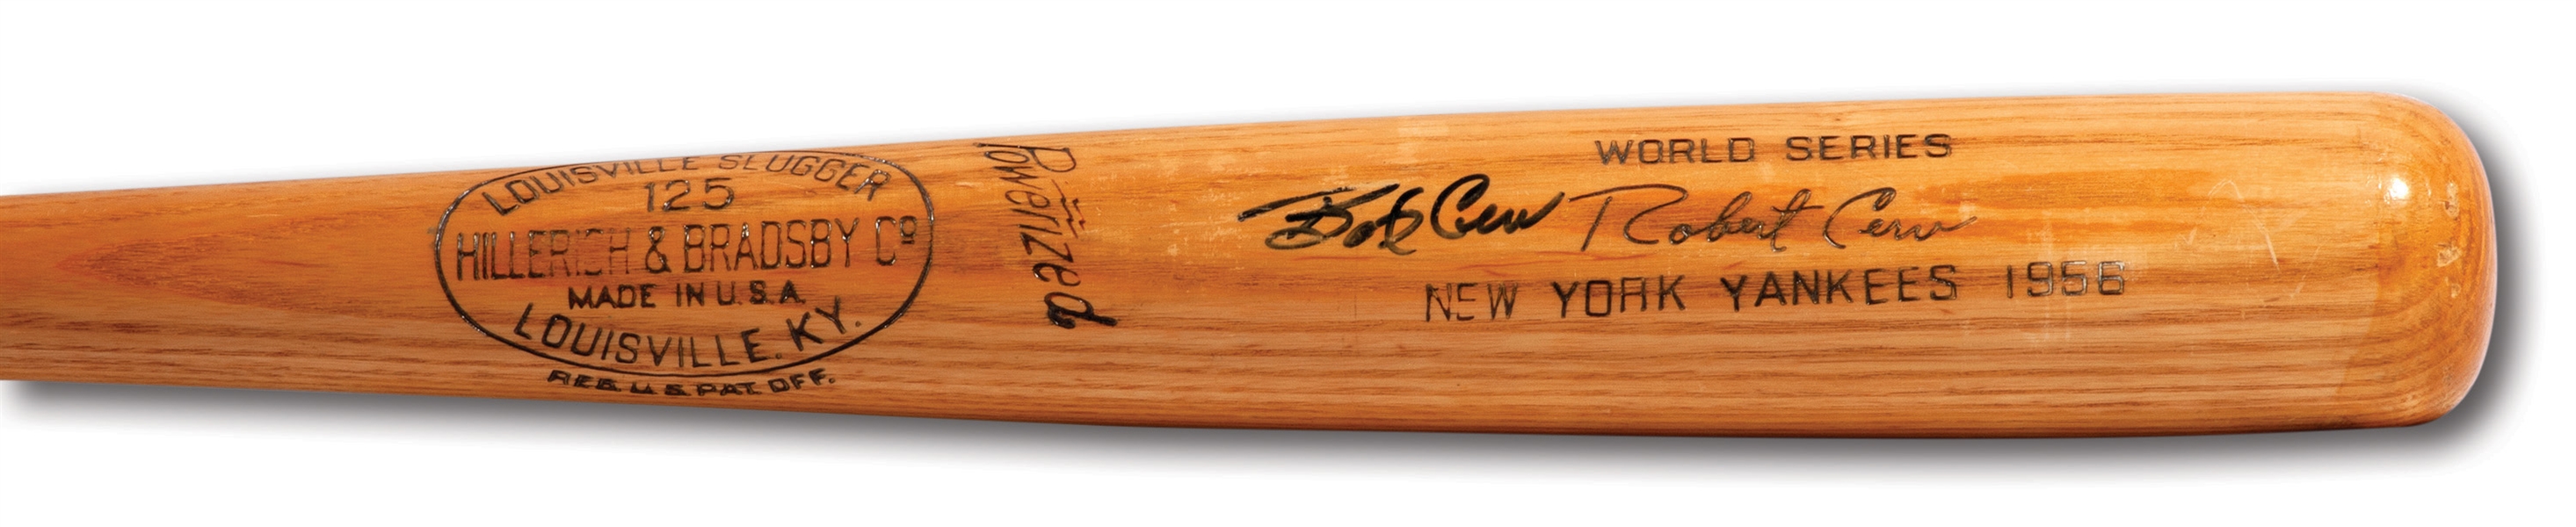 BOB CERV AUTOGRAPHED 1956 WORLD SERIES HILLERICH & BRADSBY PROFESSIONAL MODEL GAME ISSUED BAT